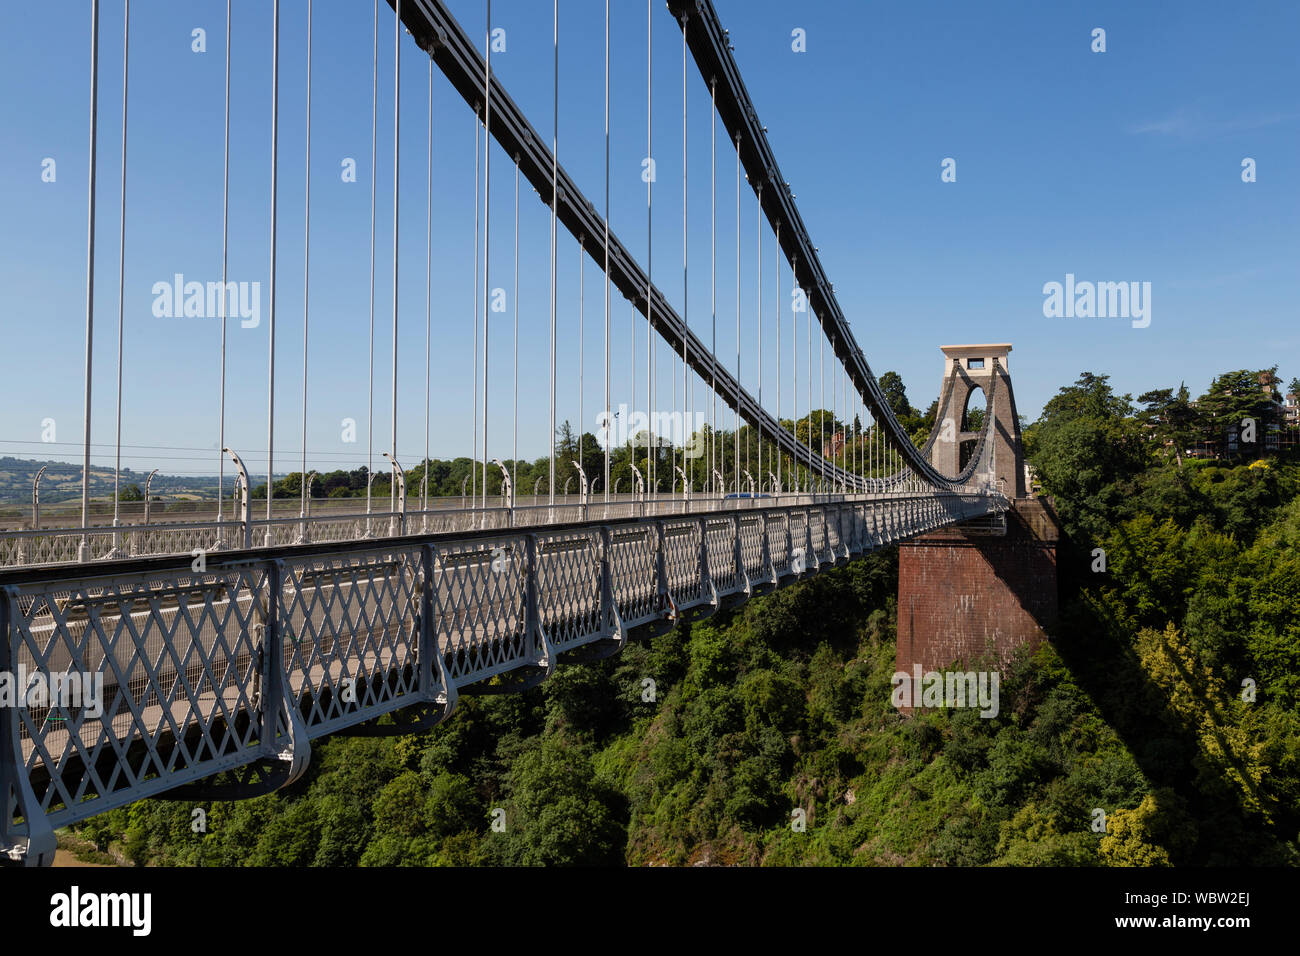 Clifton suspension bridge, over the Avon Gorge, Bristol. Designed by Isambard Kingdom Brunel and completed in 1864. Stock Photo